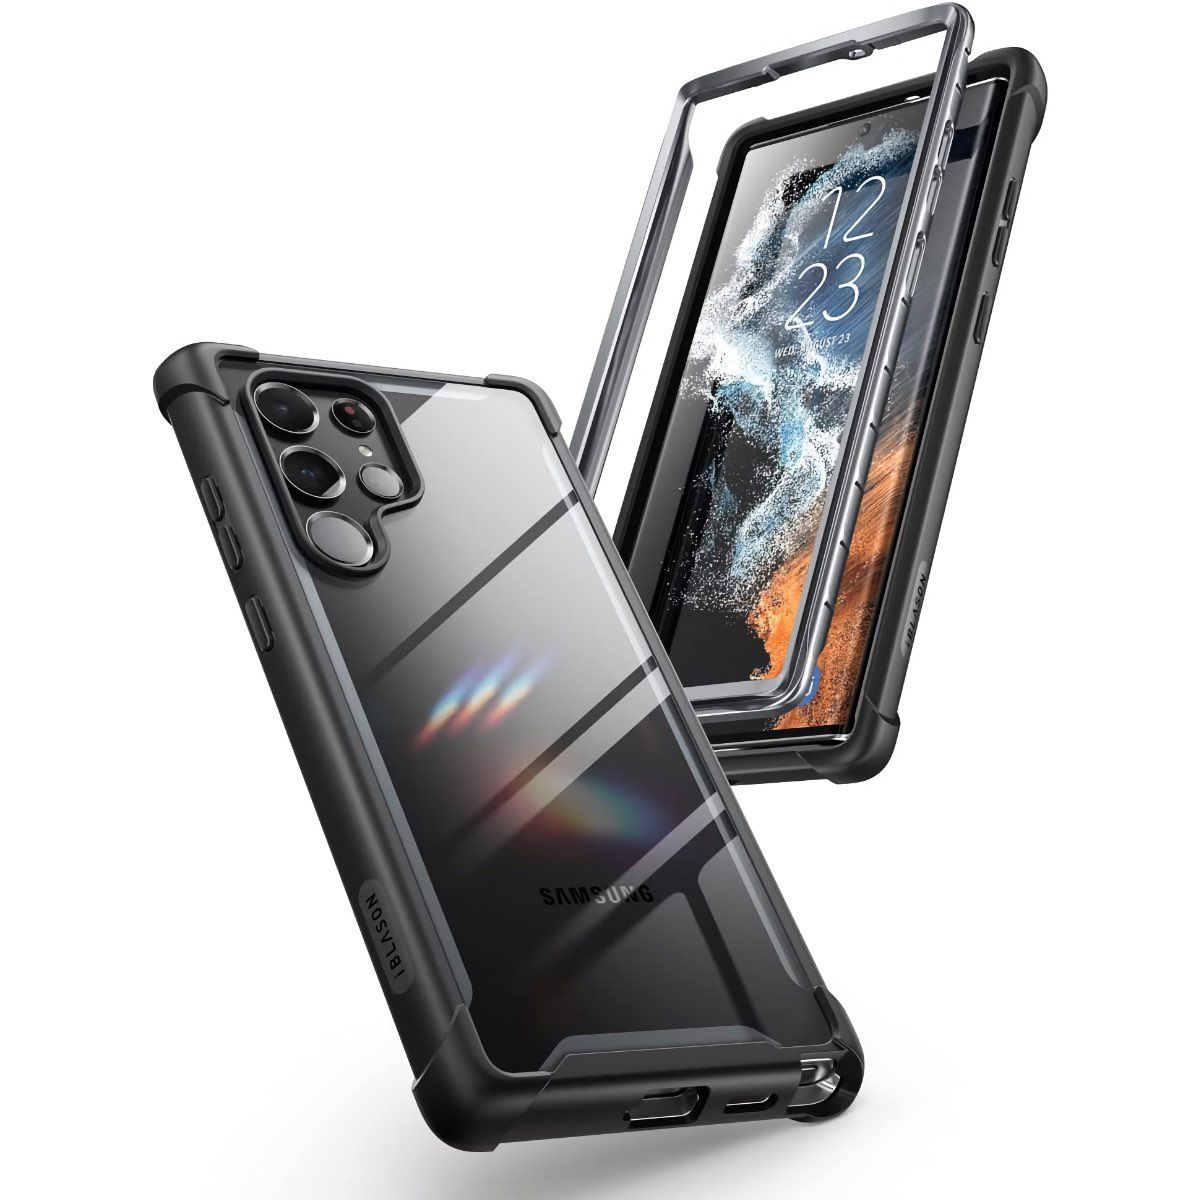 Casebus Samsung Galaxy S22 Ultra Waterproof Case with Built in Screen Protector - Metal Heavy Duty - Full Body Protective - Black - Defender Cover